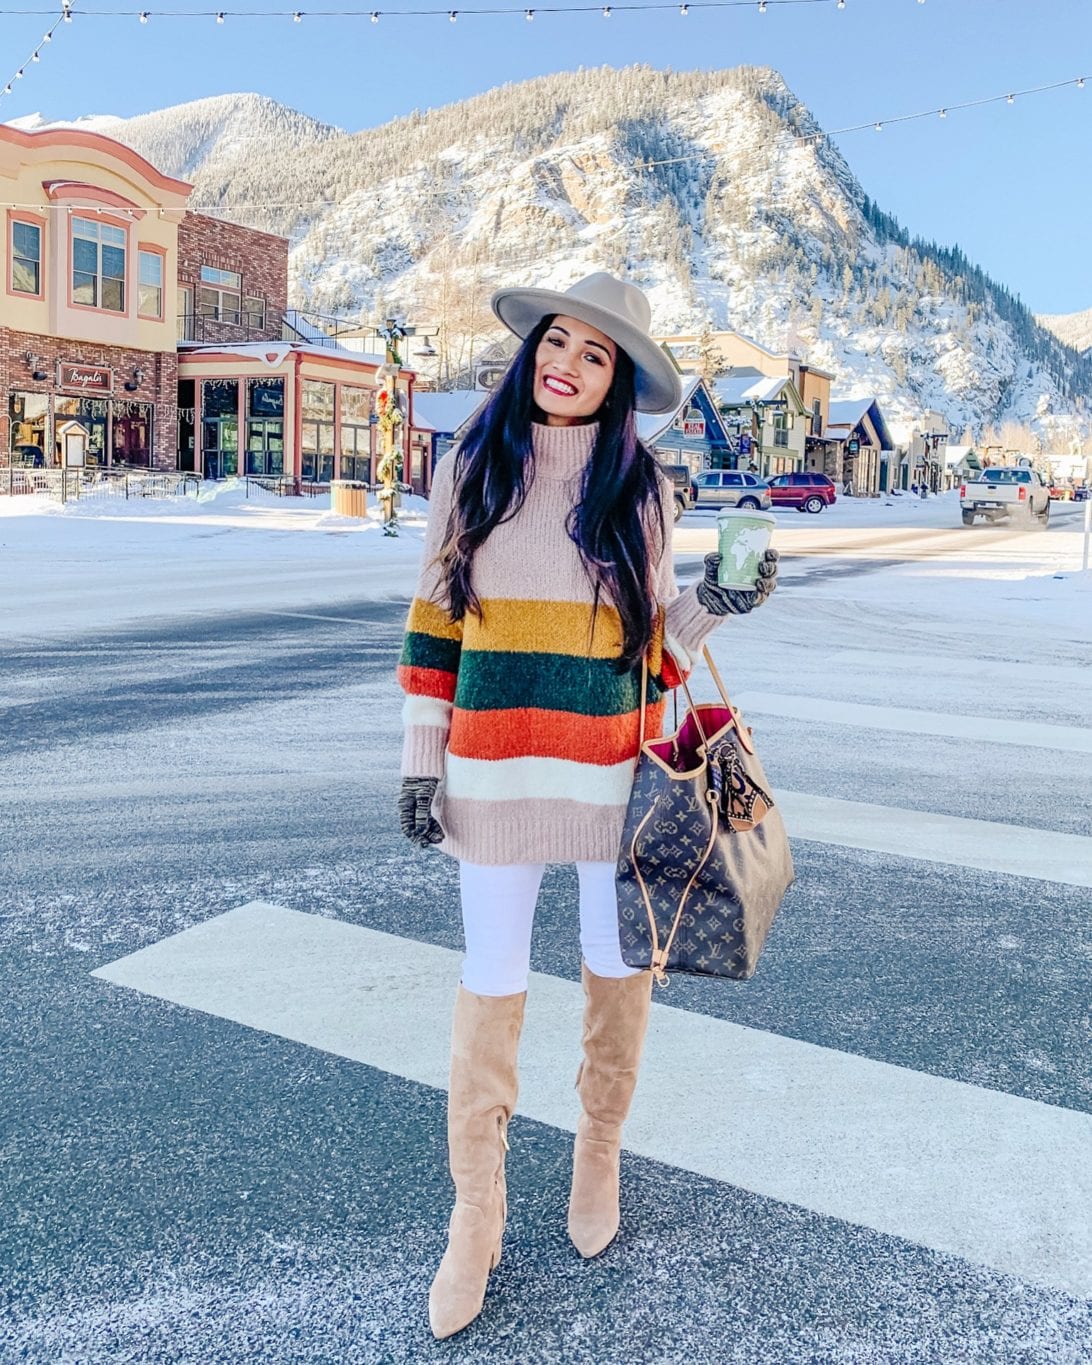 Winter Outfit Ideas for Colorado & What to Pack